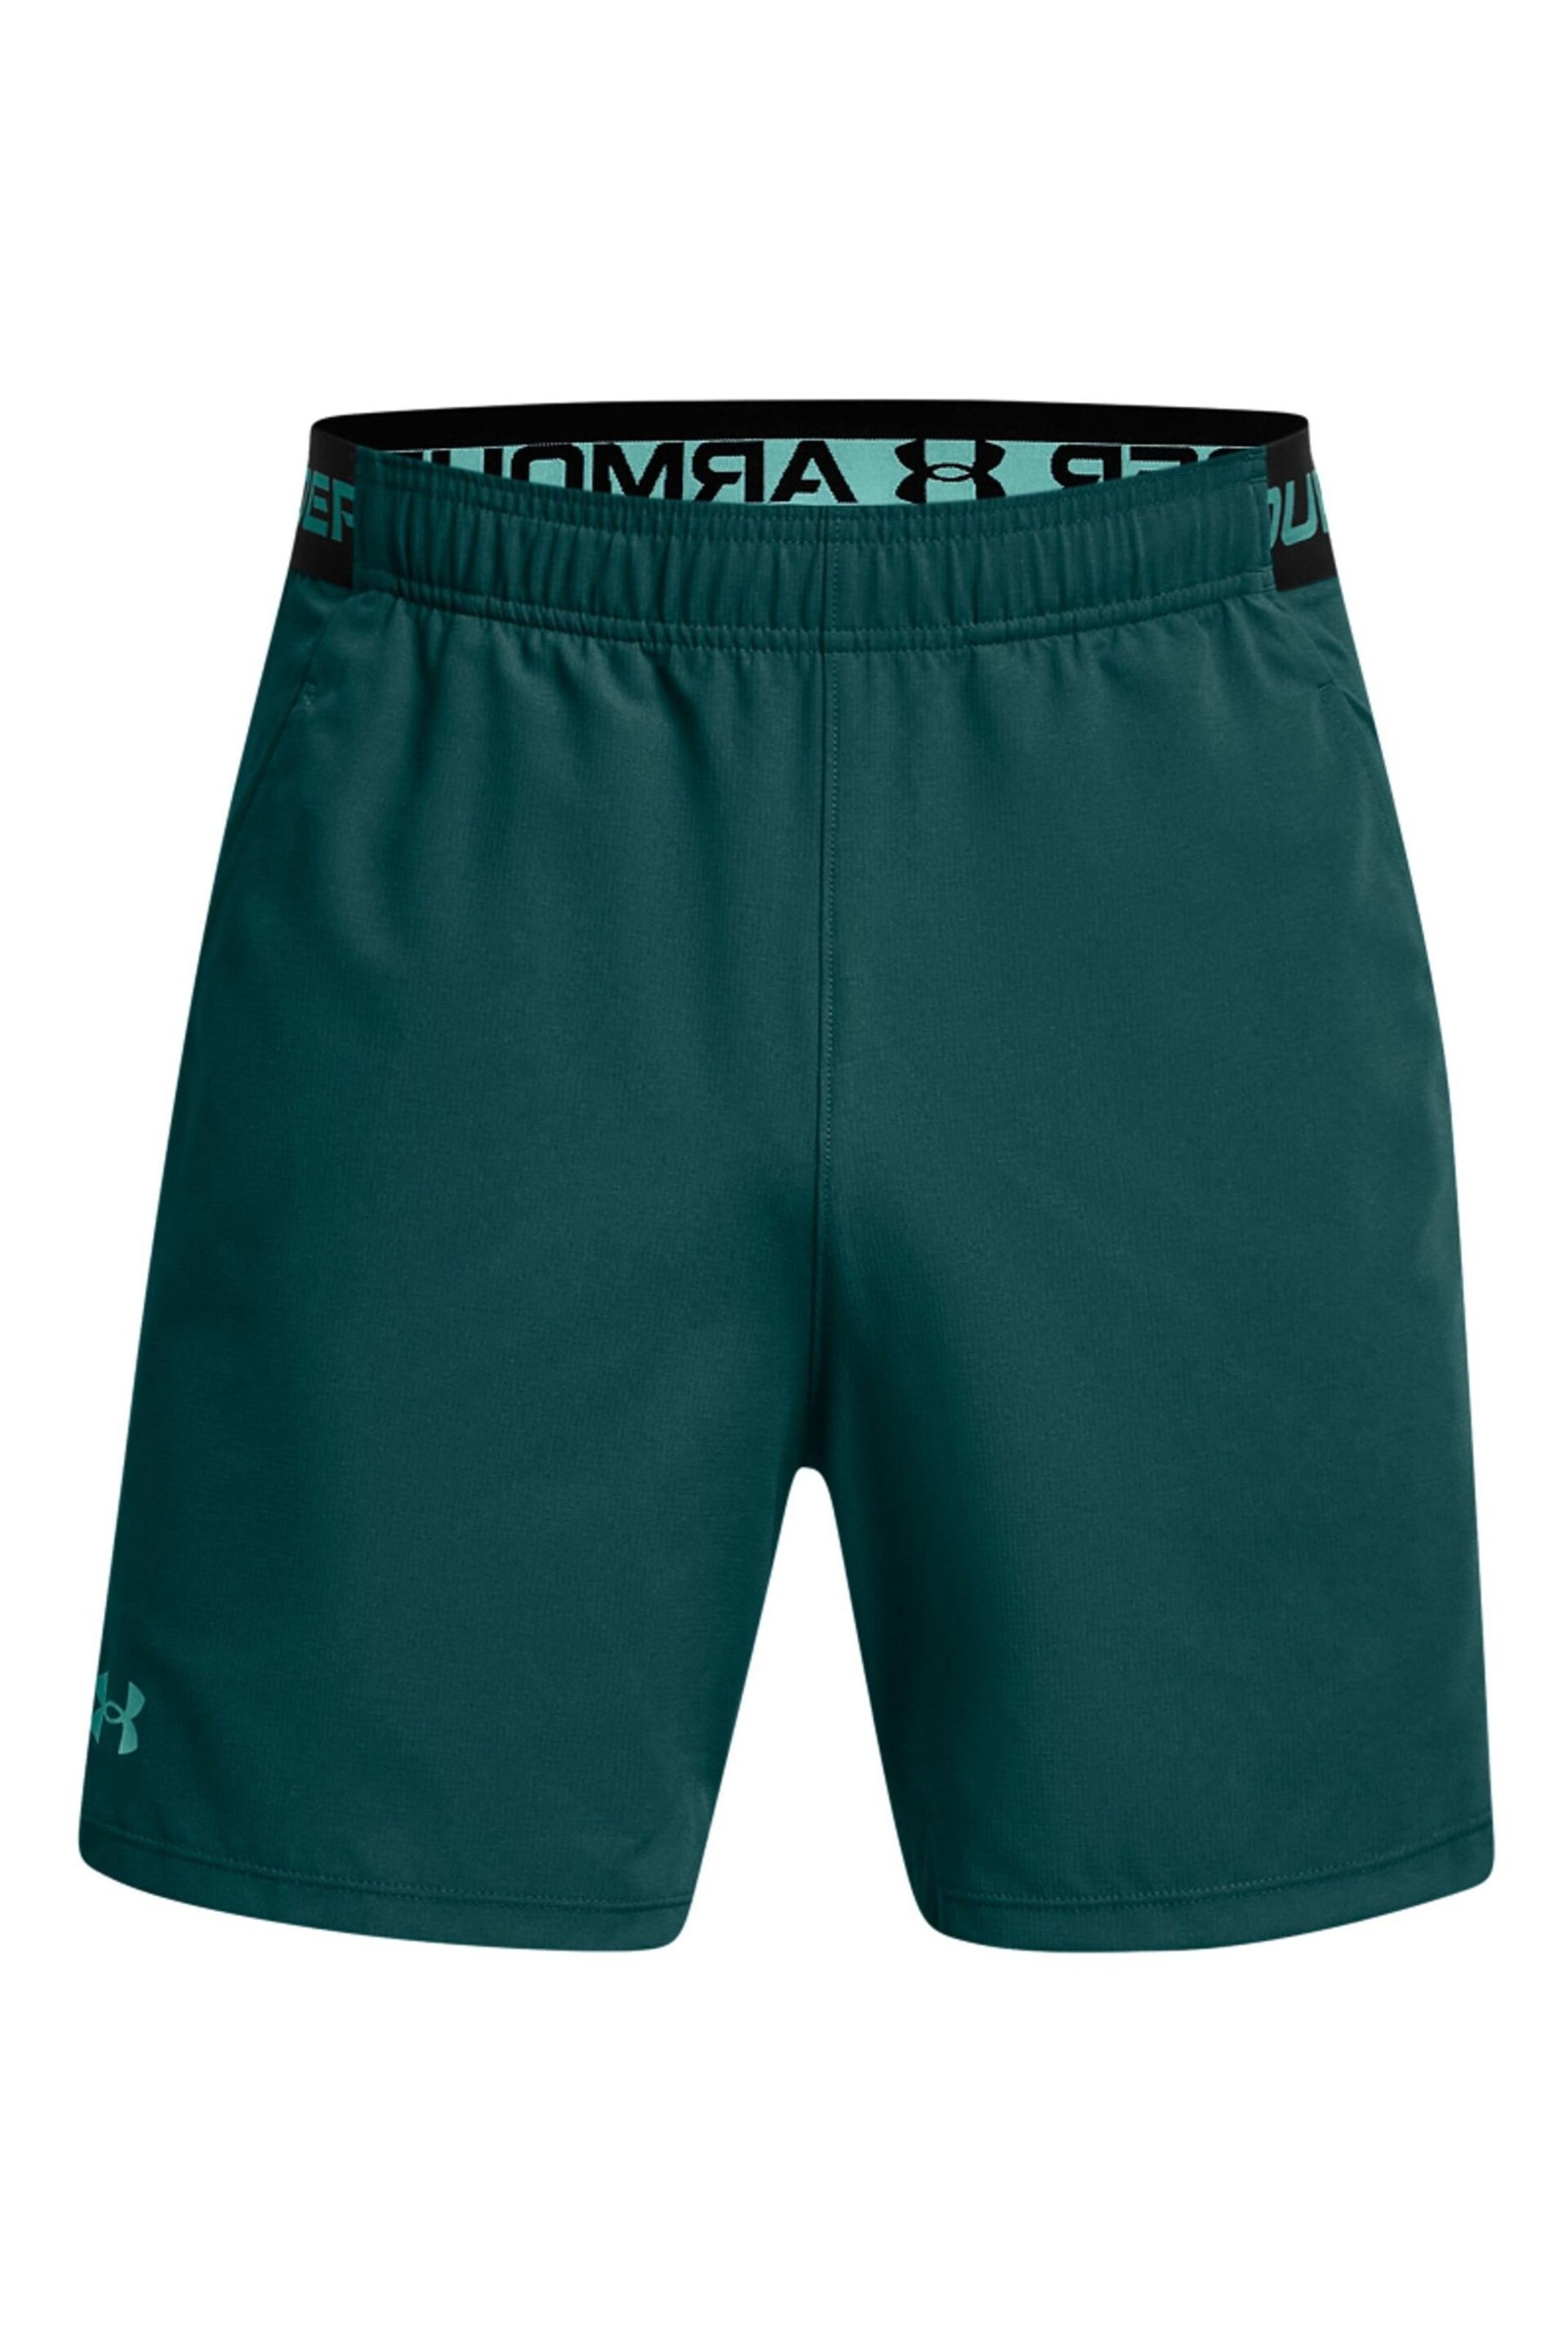 Under Armour Teal Blue Vanish Shorts - Image 5 of 6